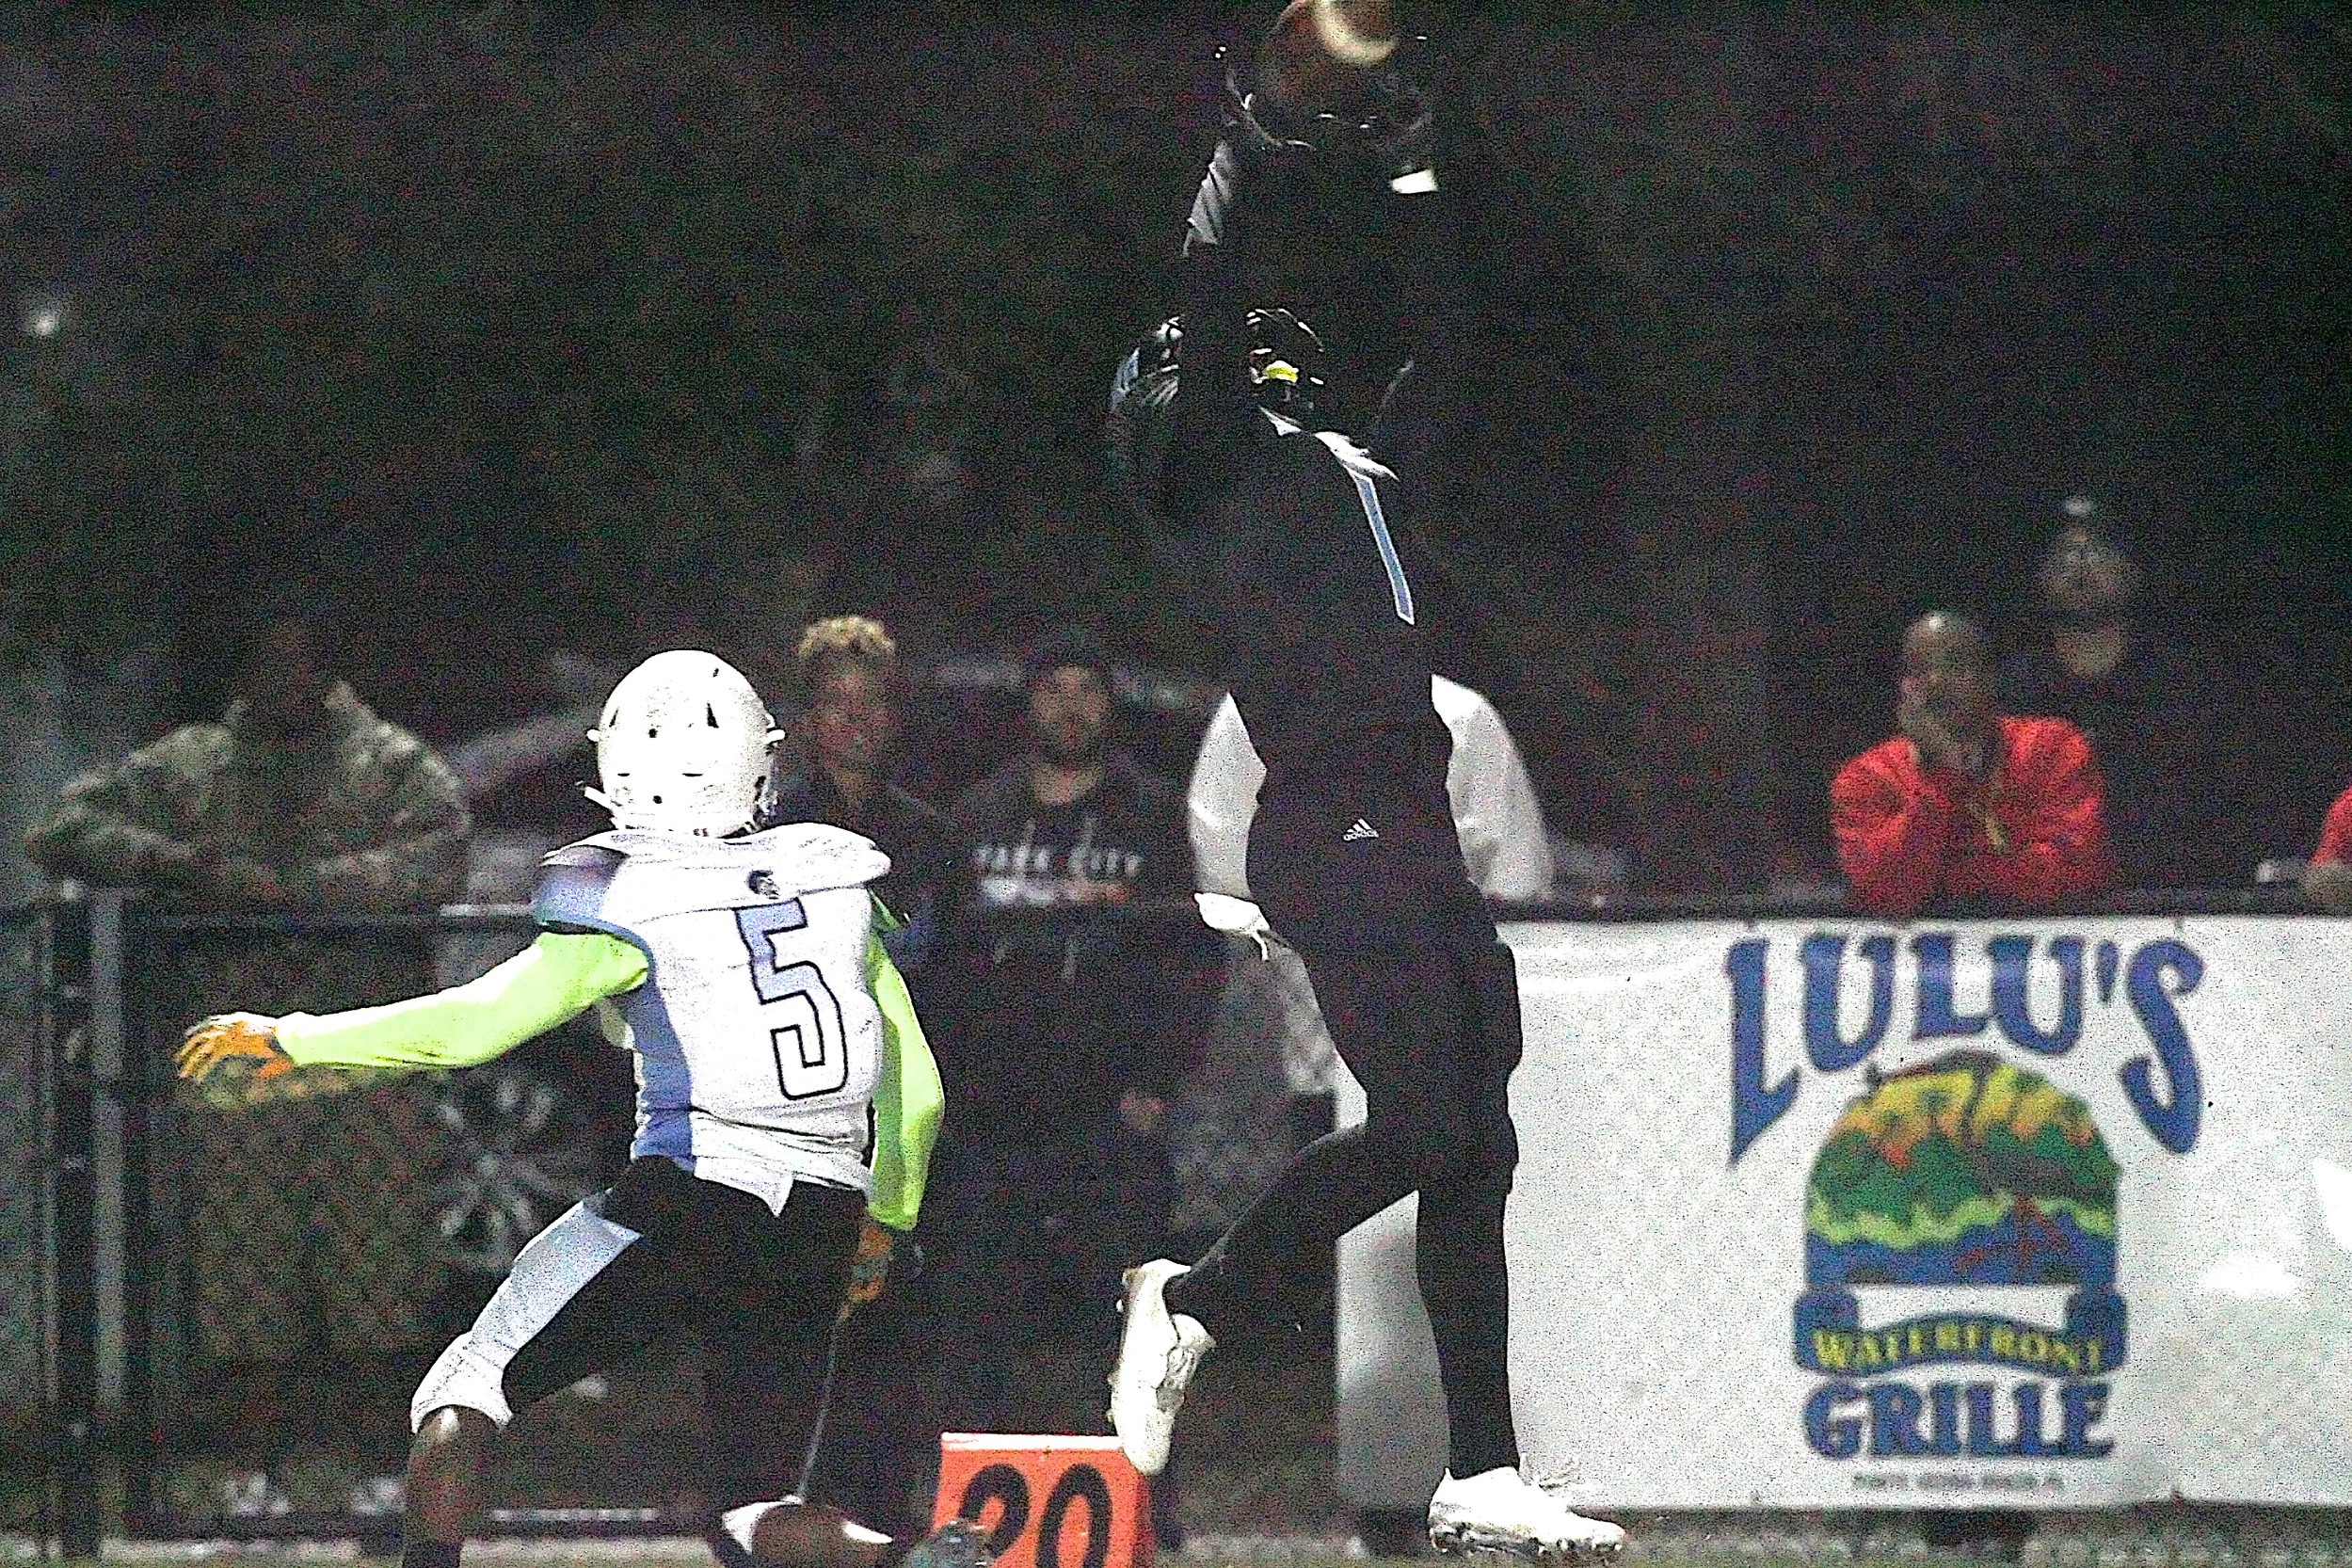 JD Pirris leaps high to pull down a Tronti pass good for 21 yards against Ribault